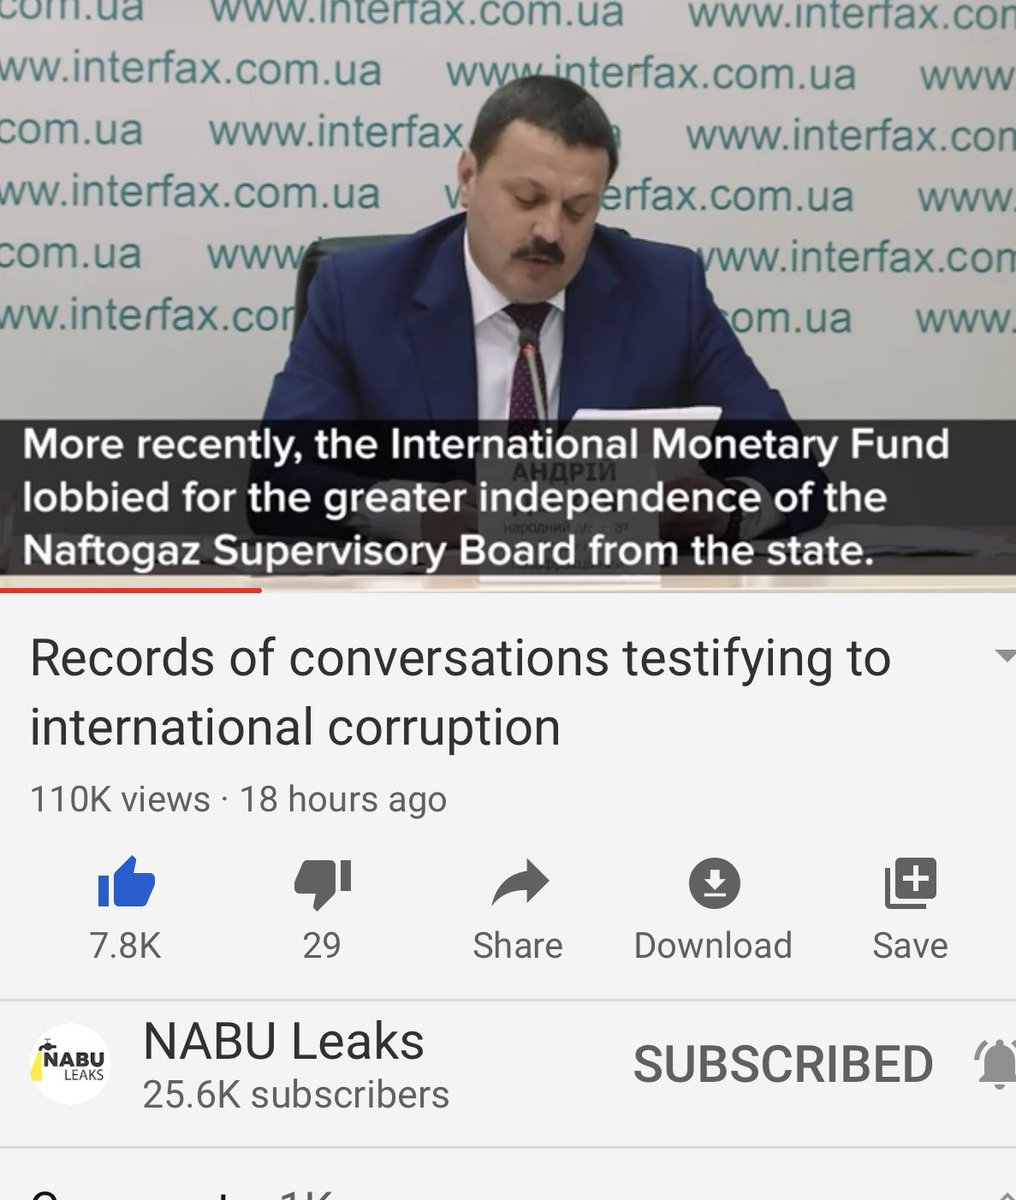 The investigator is highly sarcastic which is funny in this sad tale of corruption. Anyway, he reminds us what we heard back in Nov about the corruption, incl Hochstein being the Biden henchman watching over Naftogaz for him